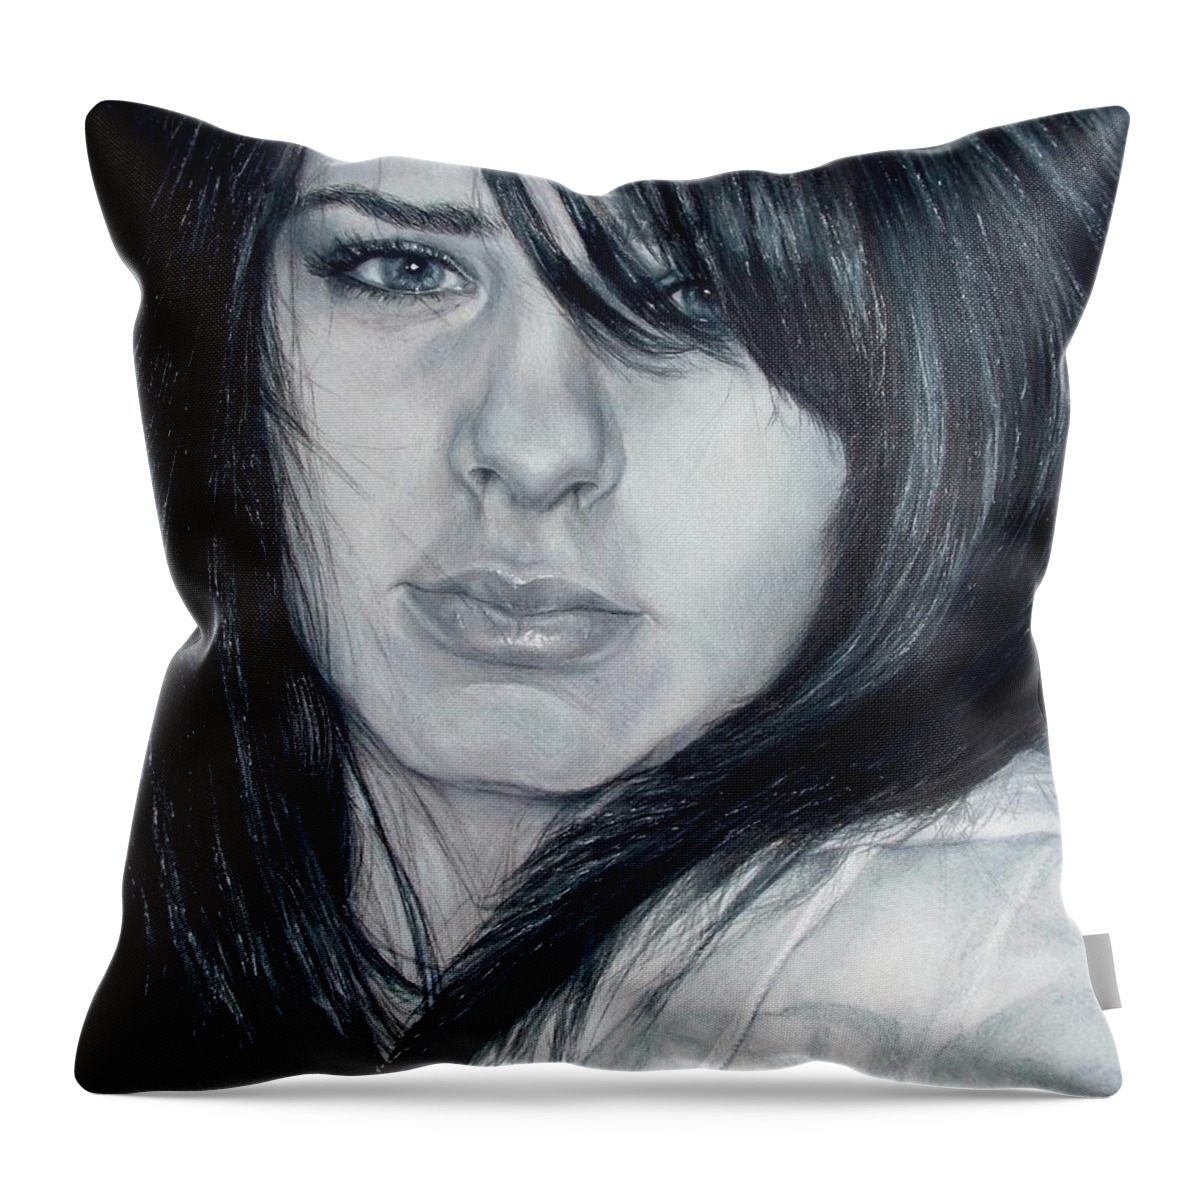 Girl Throw Pillow featuring the drawing Just Me by Shana Rowe Jackson